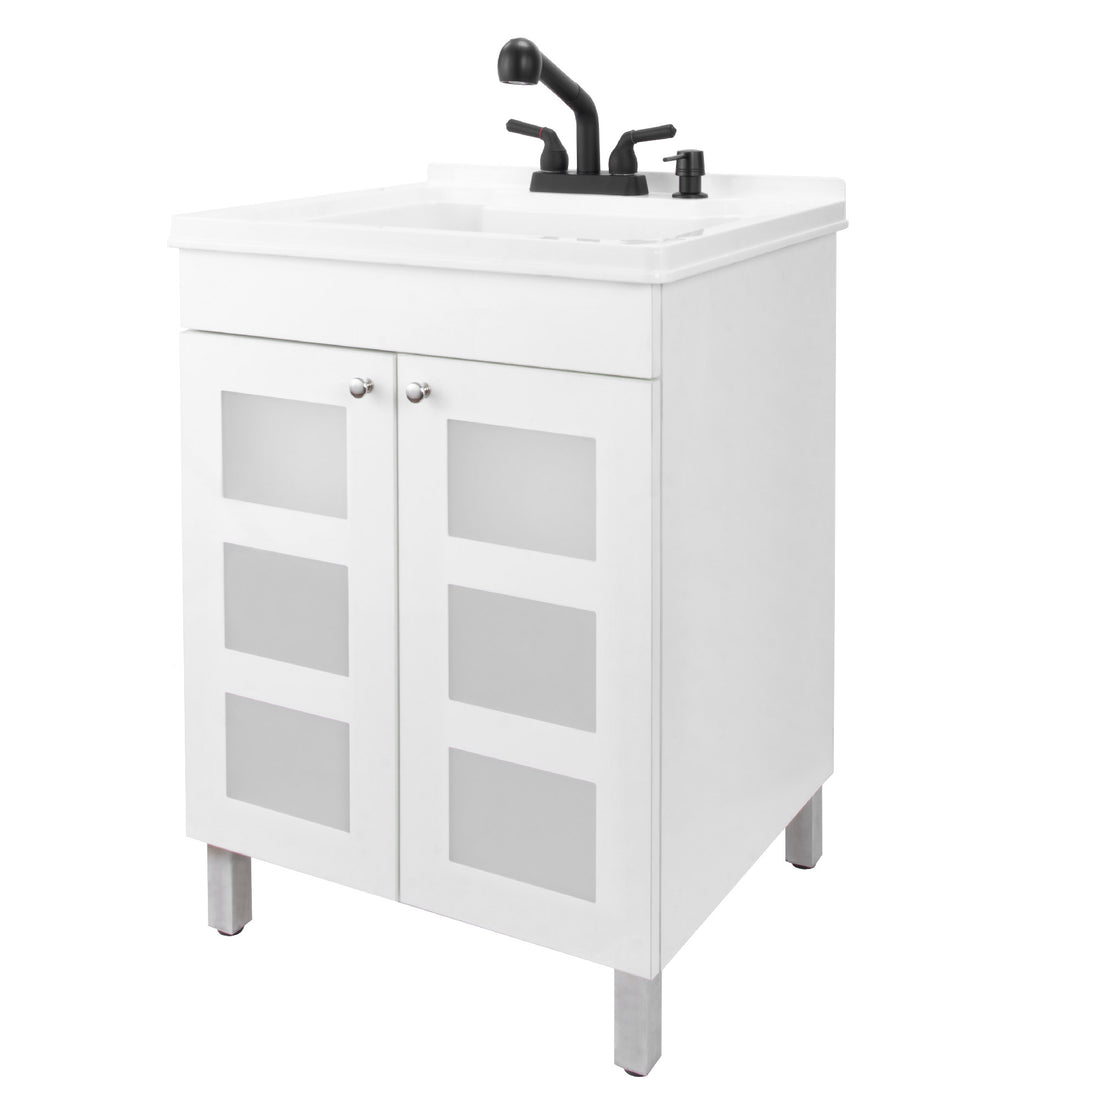 Tehila White Vanity Cabinet and White Utility Sink with Black Finish Pull-Out Faucet - Utility sinks vanites Tehila